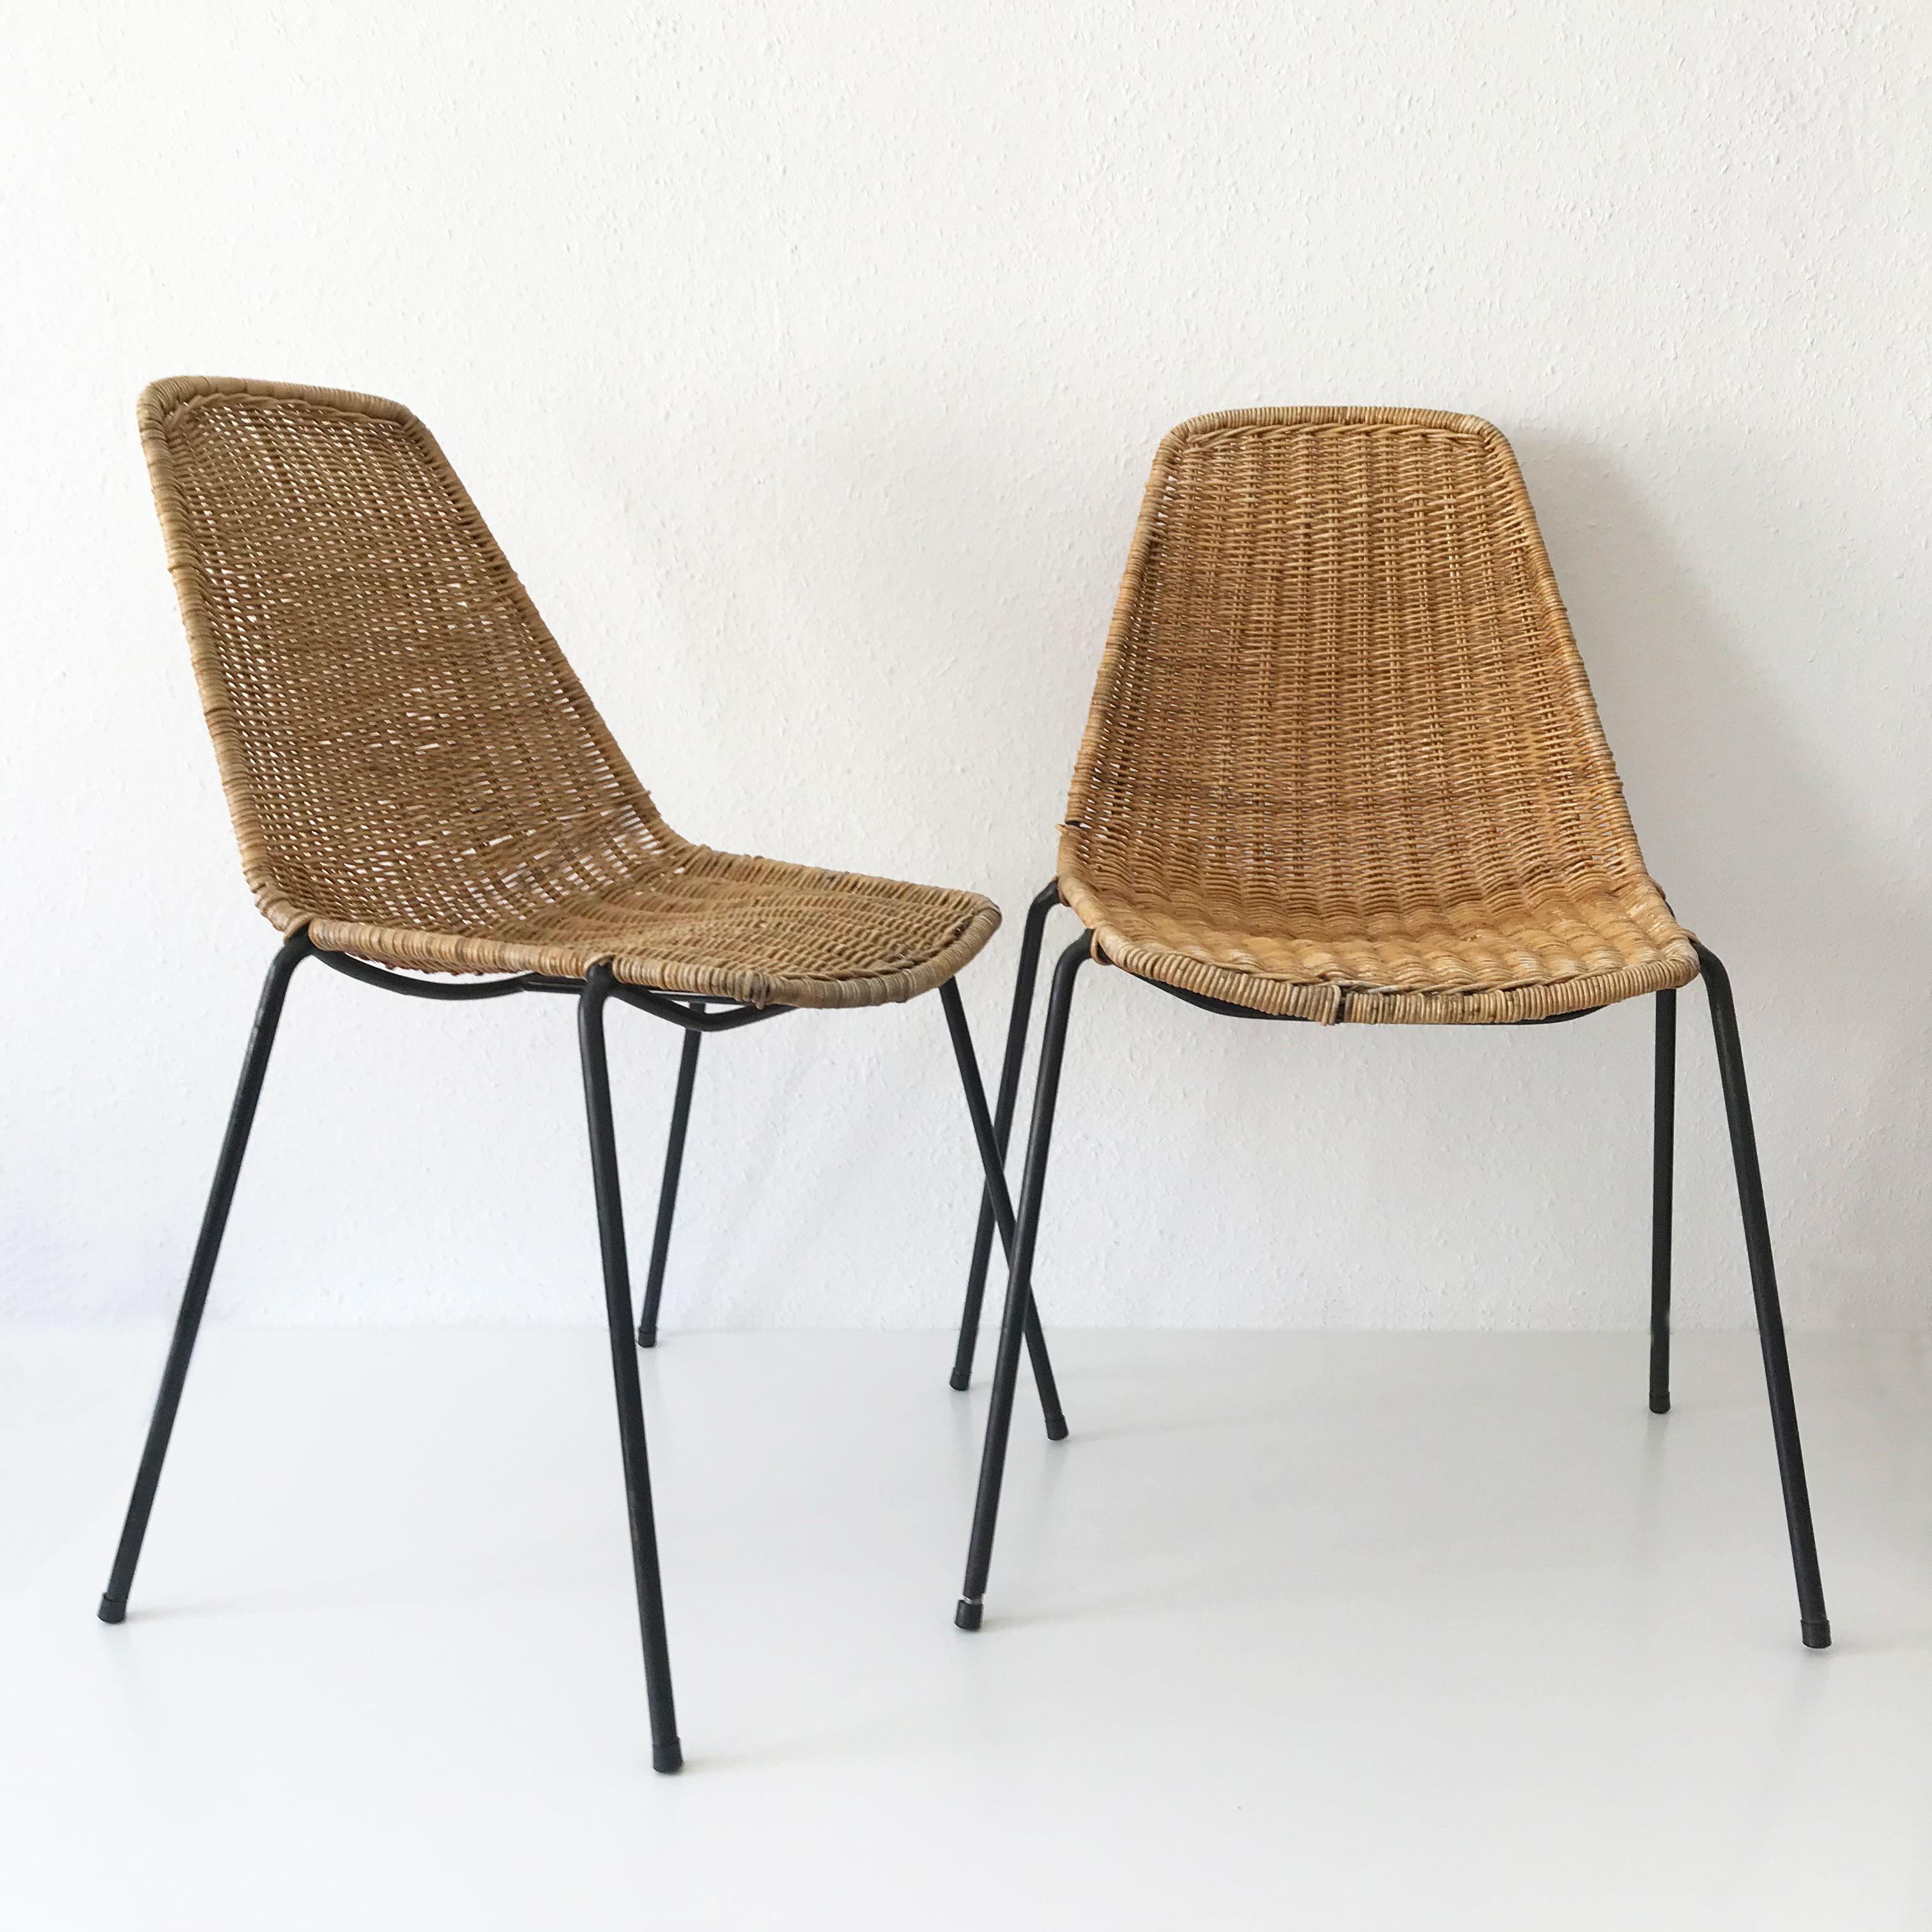 Enameled Set of Two Basket Chairs and Stool by Gian Franco Legler, 1951, Switzerland